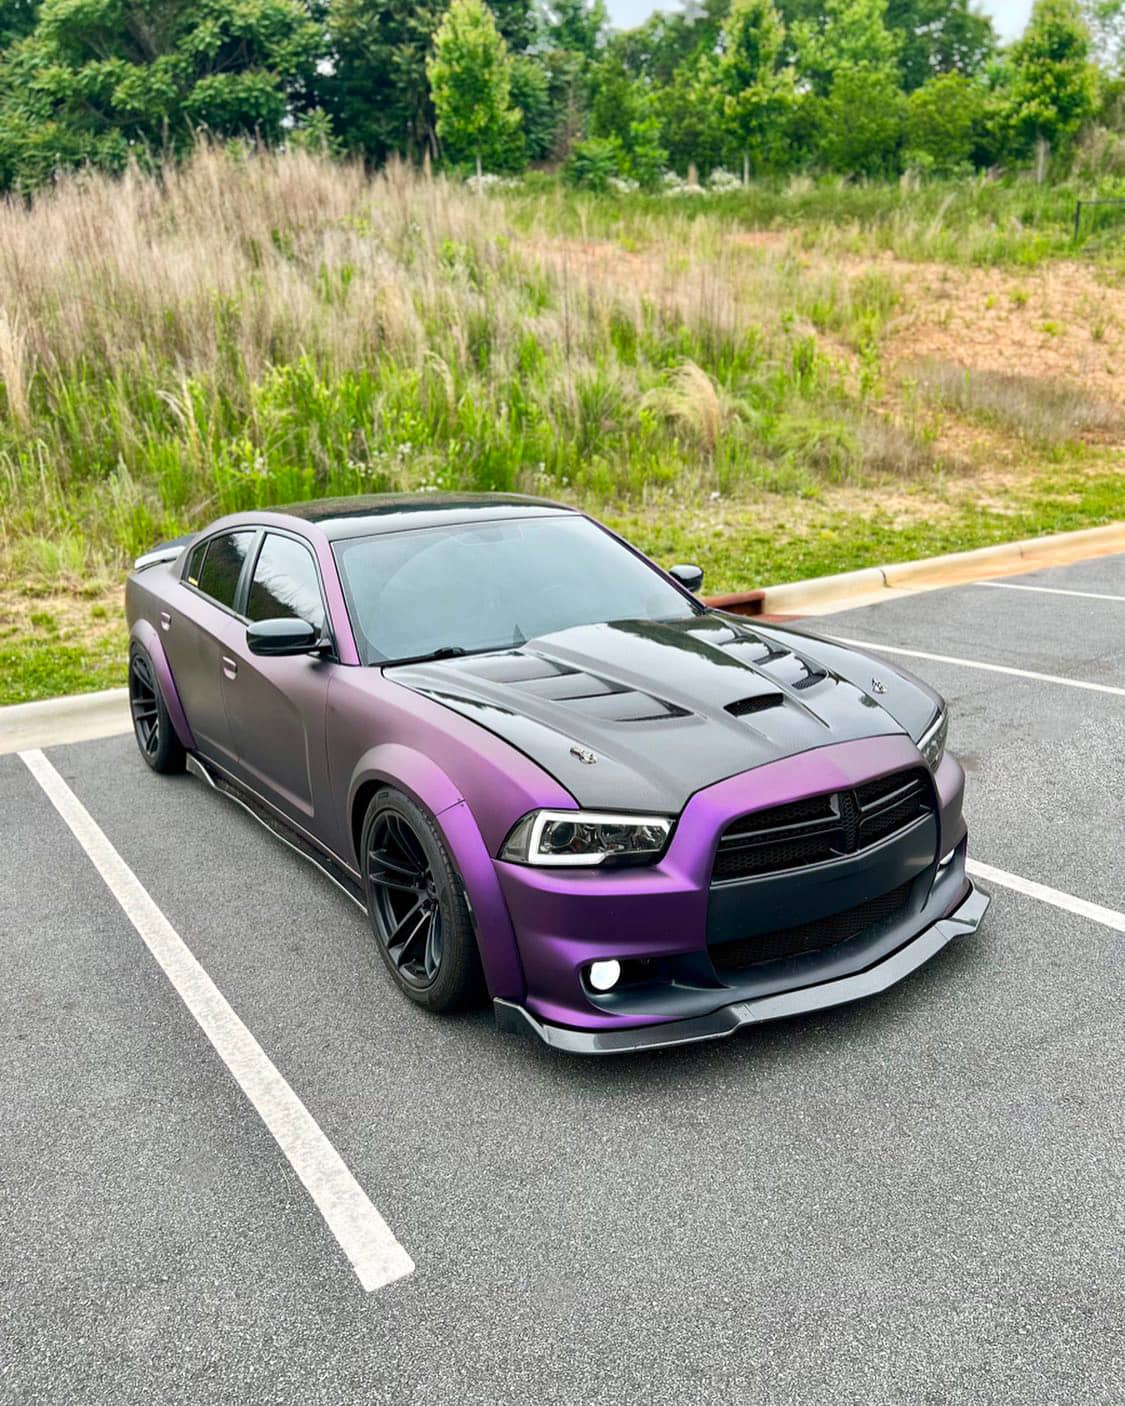 2012 Dodge Charger with custom wide body kit and RGB headlights